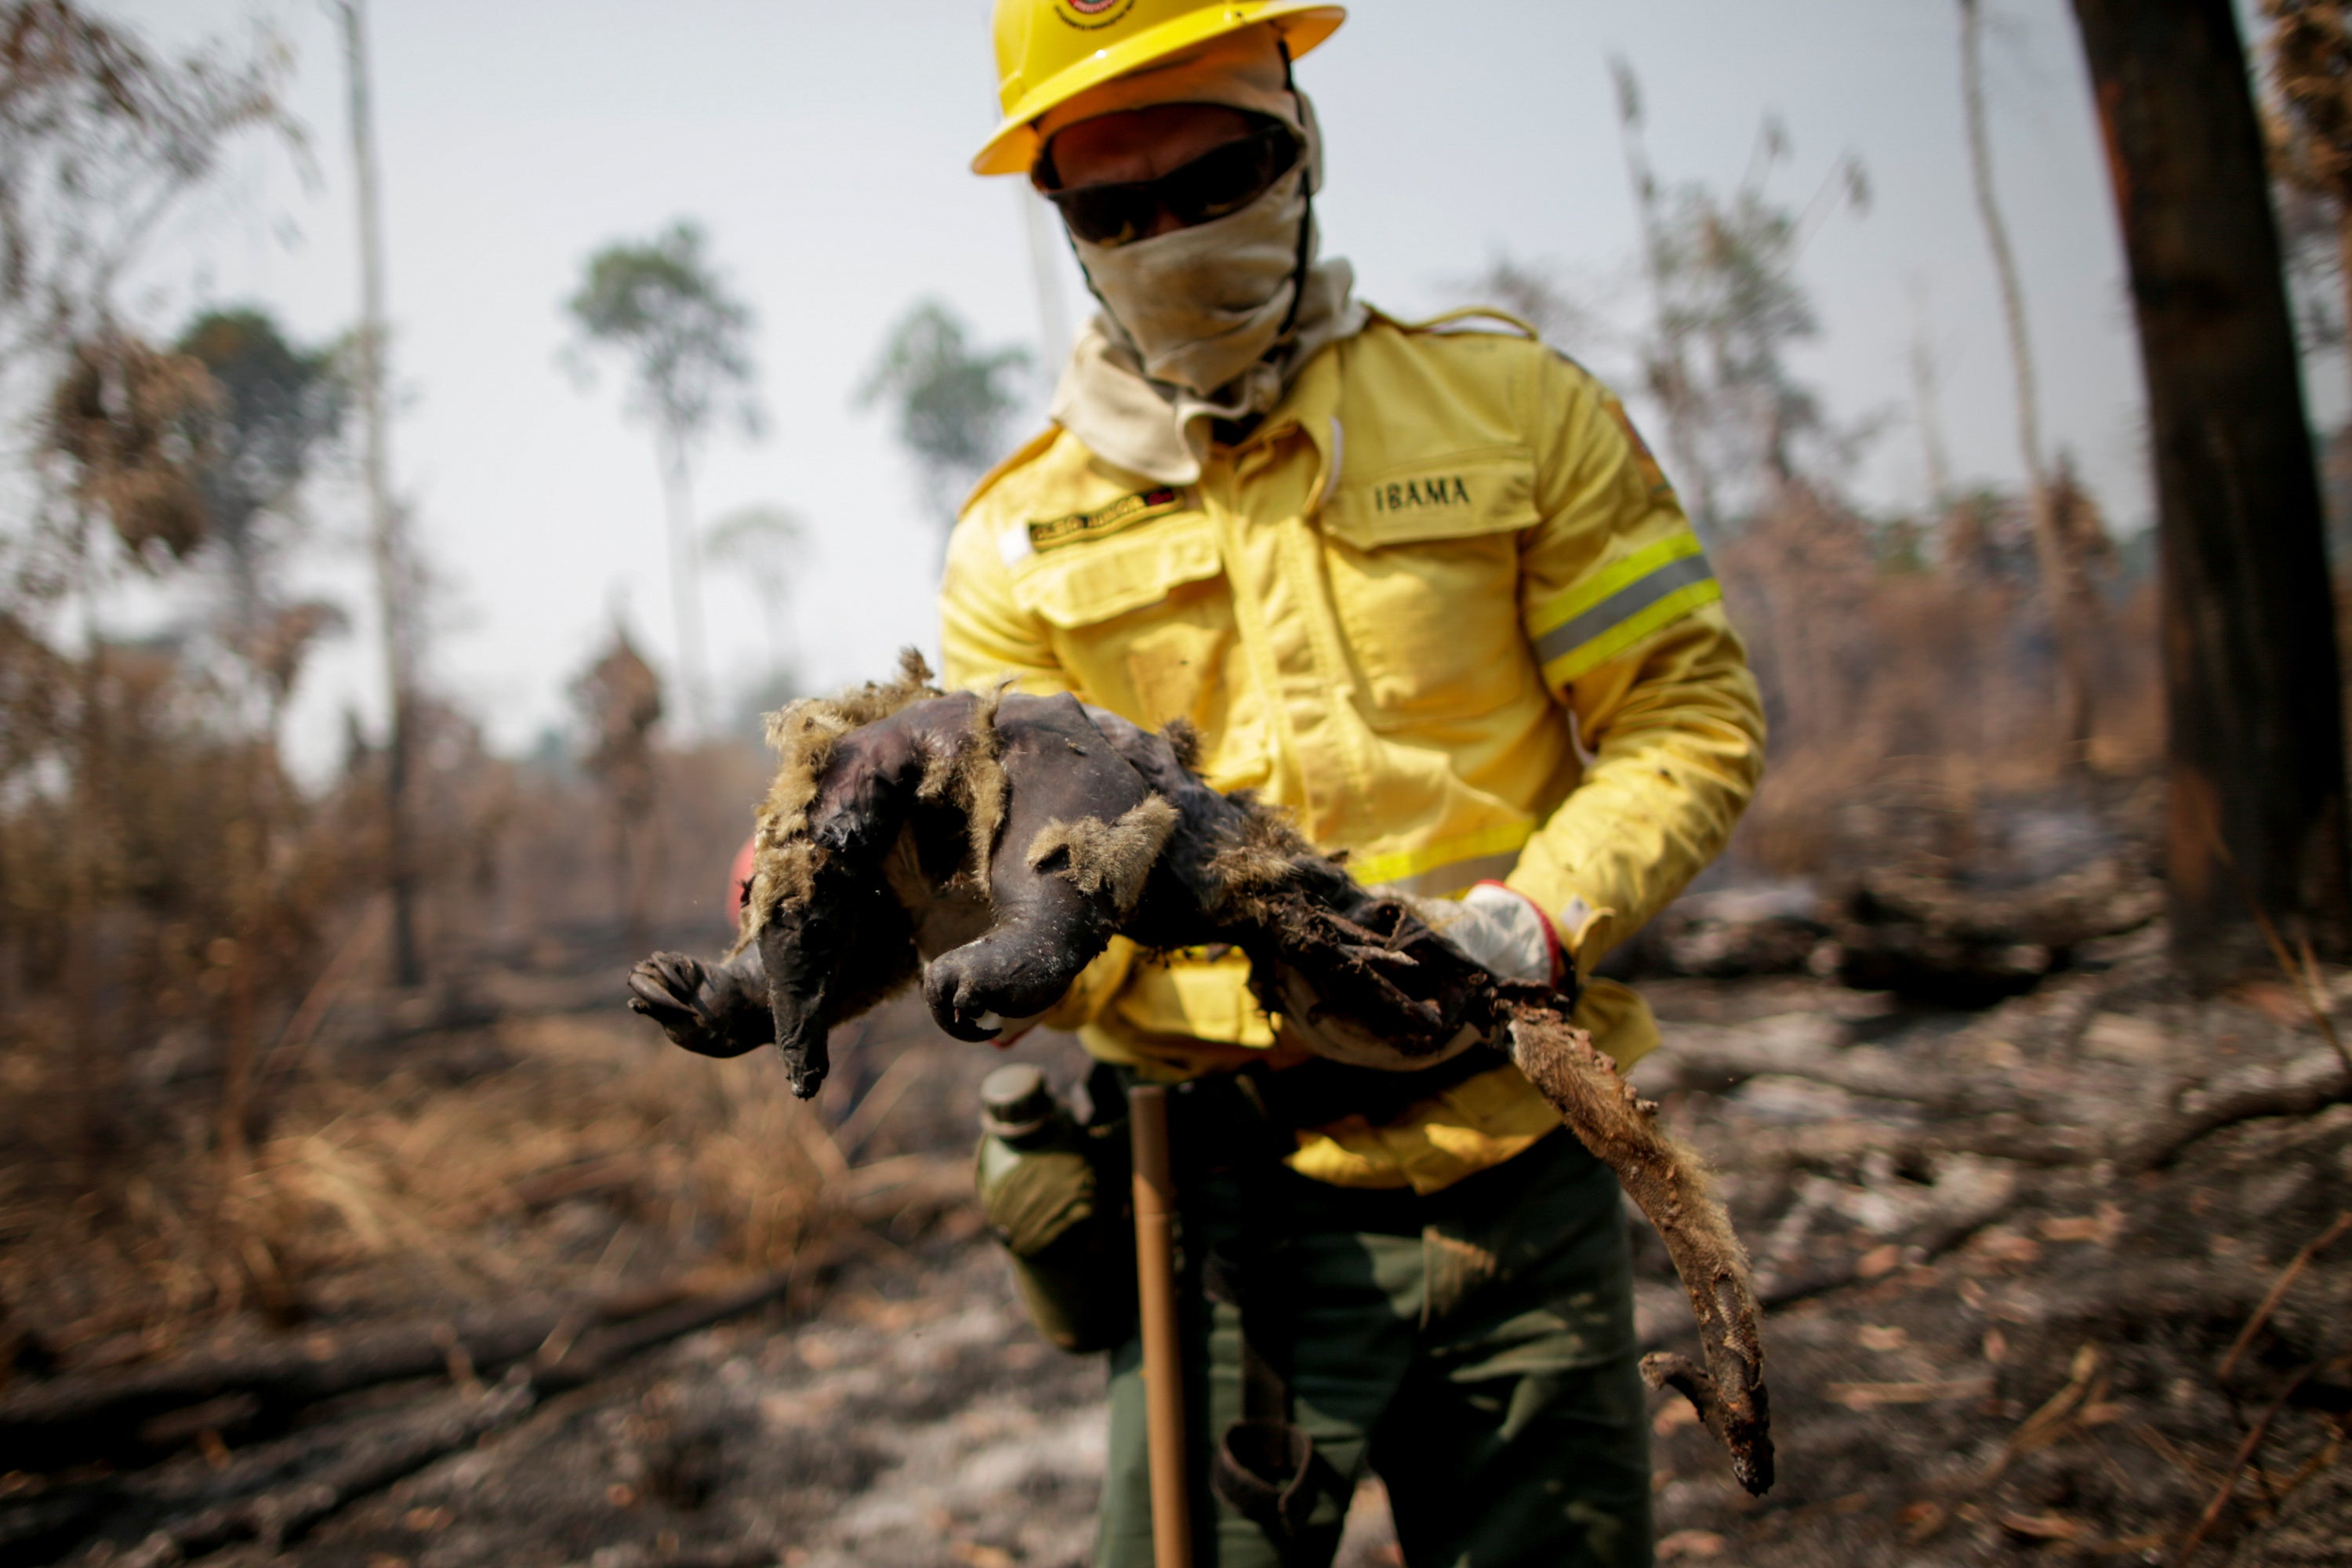 Cleio Junior, a fire brigade member of Brazilian Institute for the Environment and Renewable Natural Resources, holds a dead anteater while attempting to control hot points in a tract of the Amazon jungle